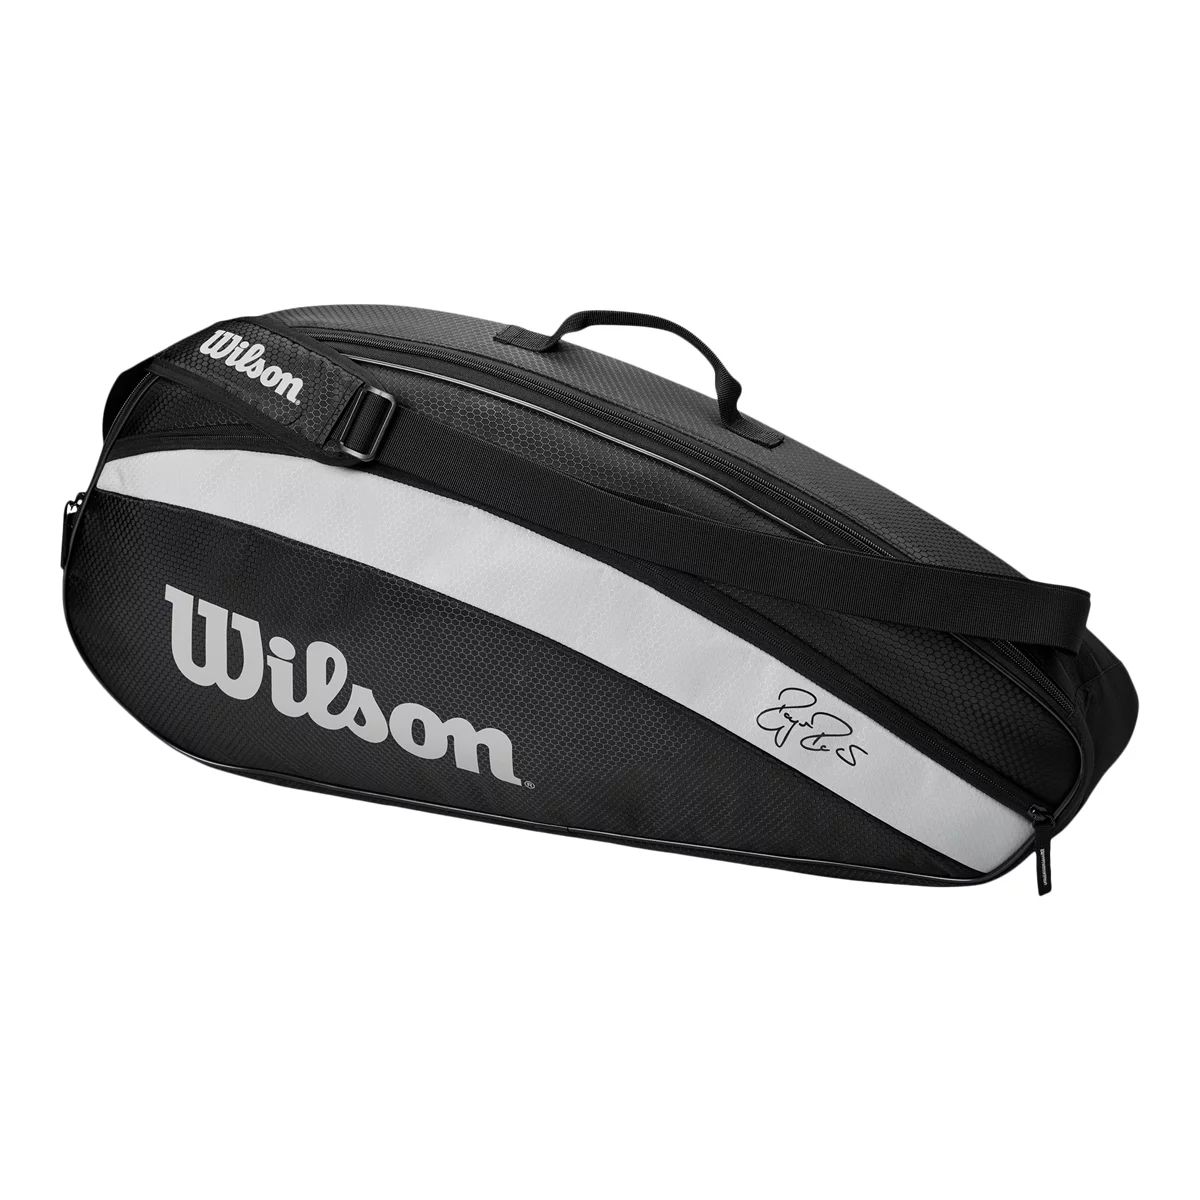 Wilson's new golf bag is an upgrade to its NeXus line | This is the Loop |  Golf Digest